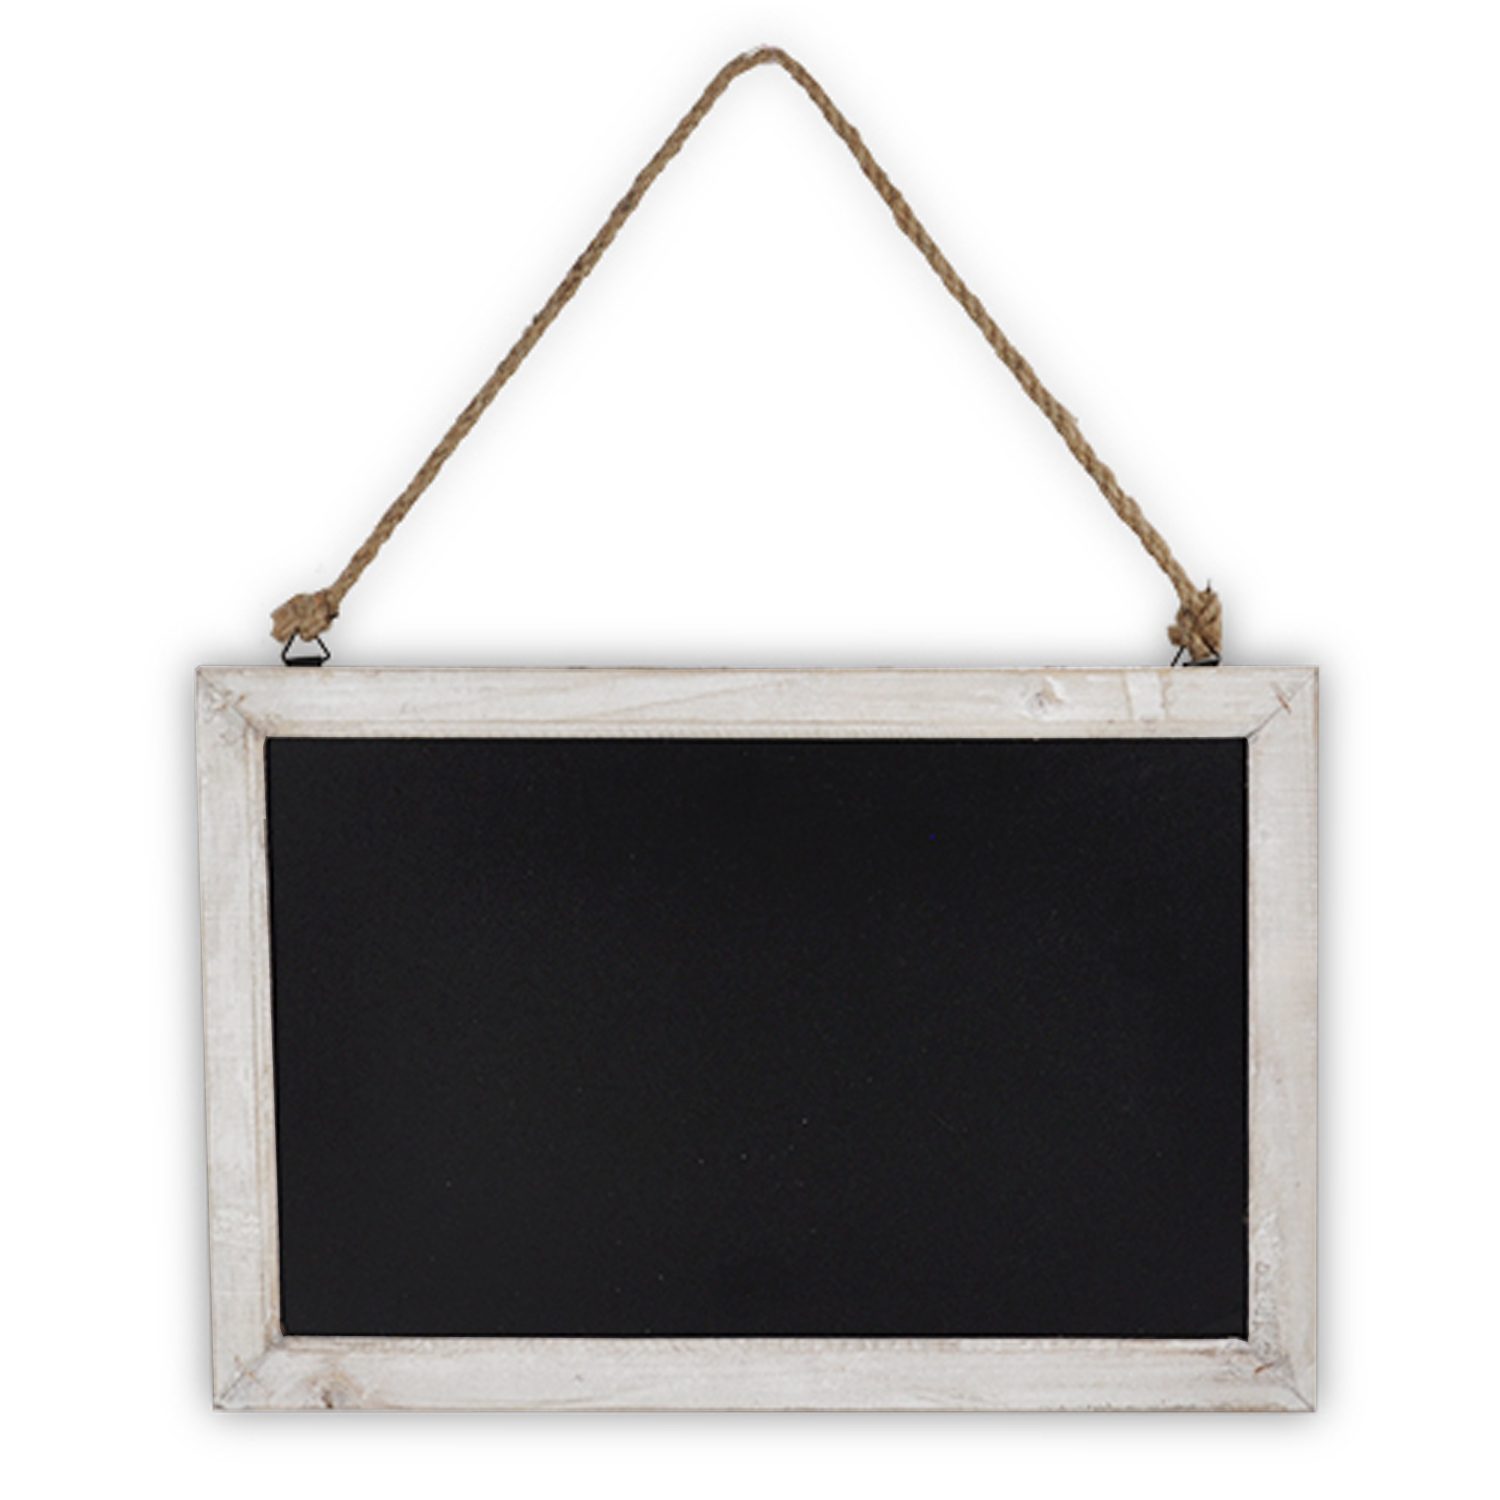 Hanging Store Display Chalkboard Sign 10in